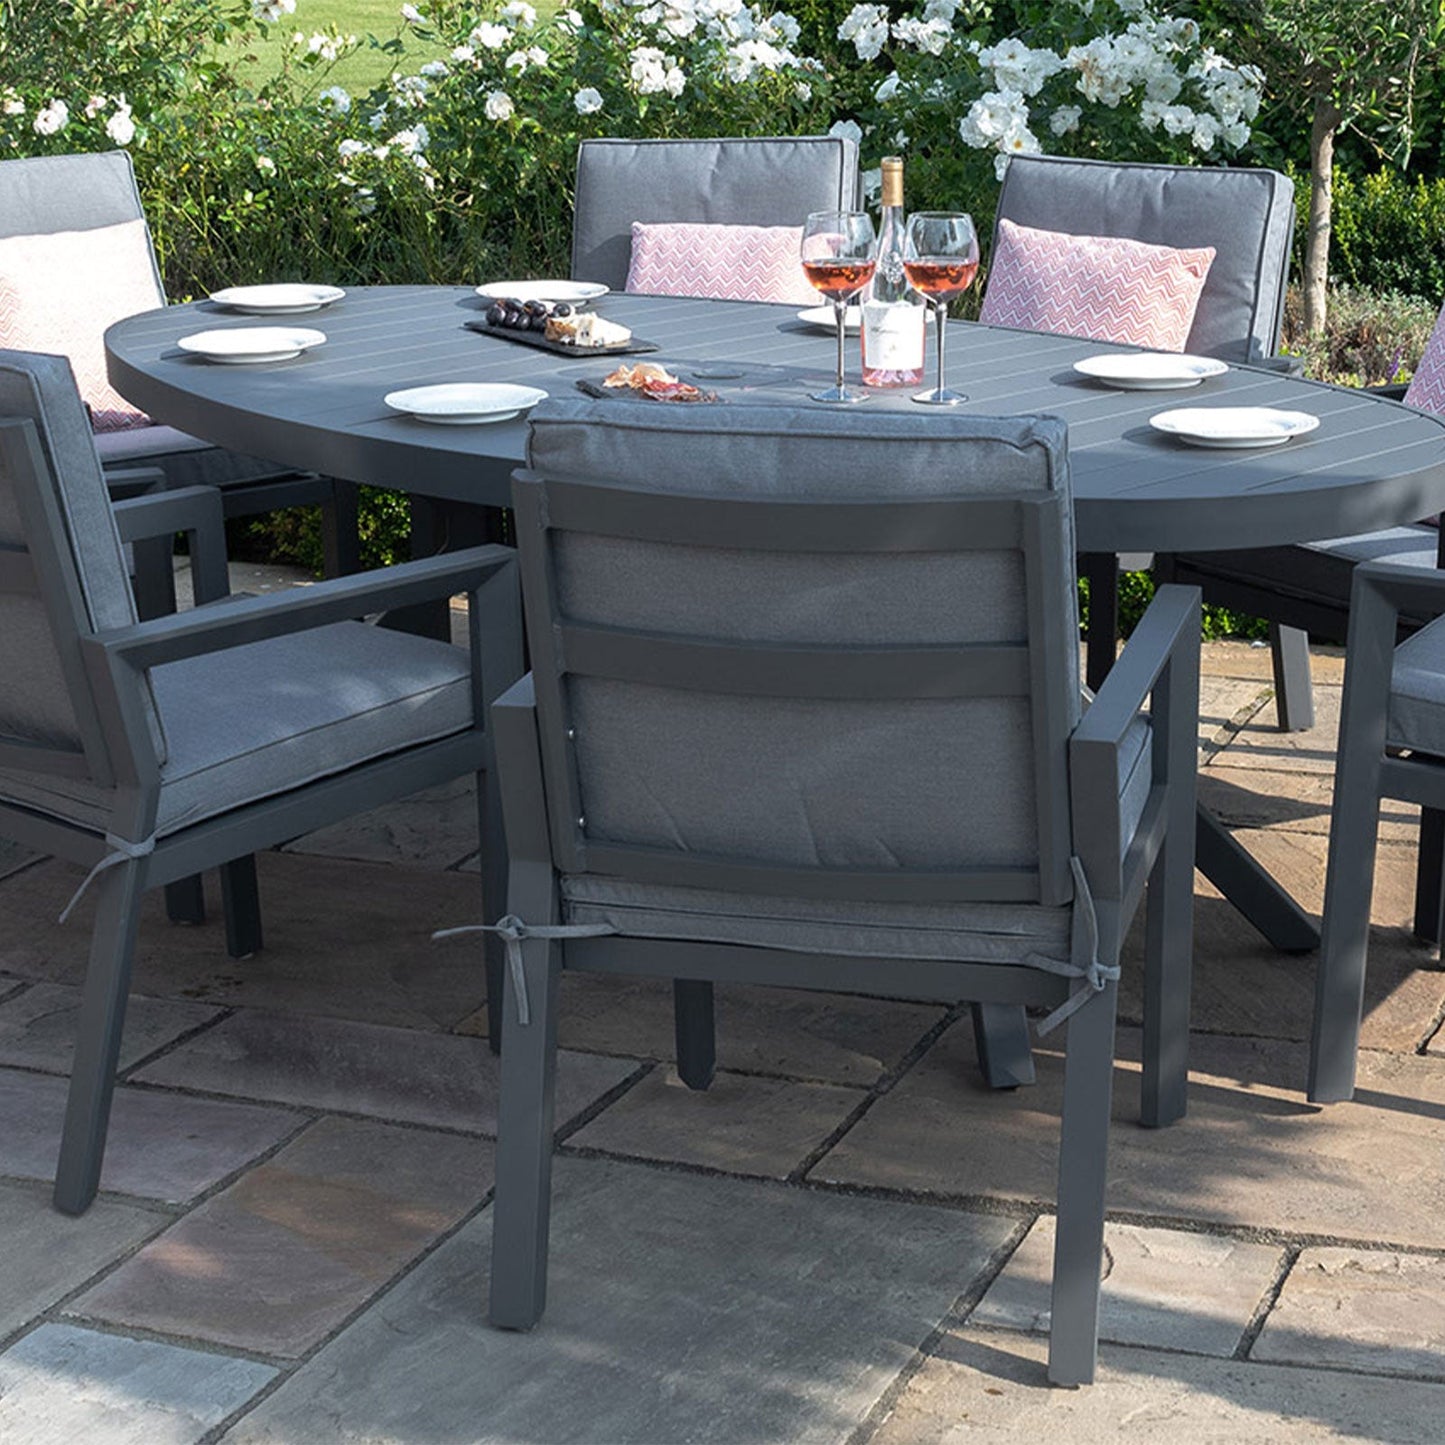 New York Outdoor 8 Seat Oval Dining Set